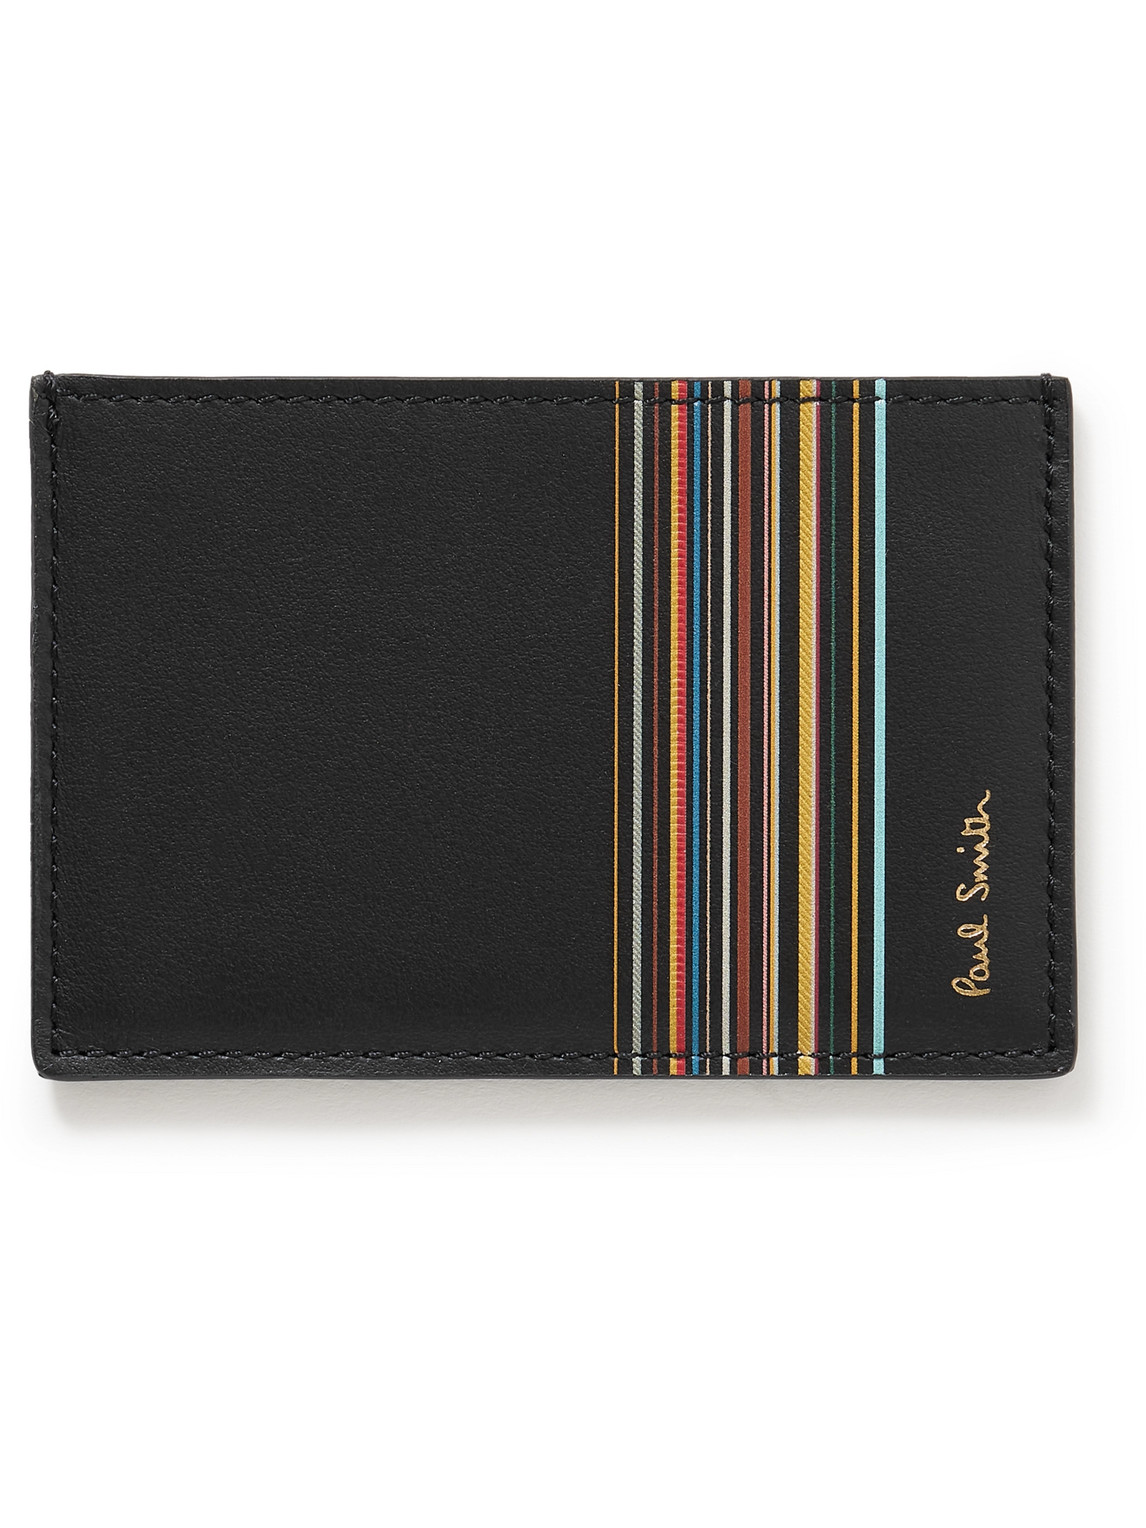 PAUL SMITH STRIPED LEATHER CARDHOLDER